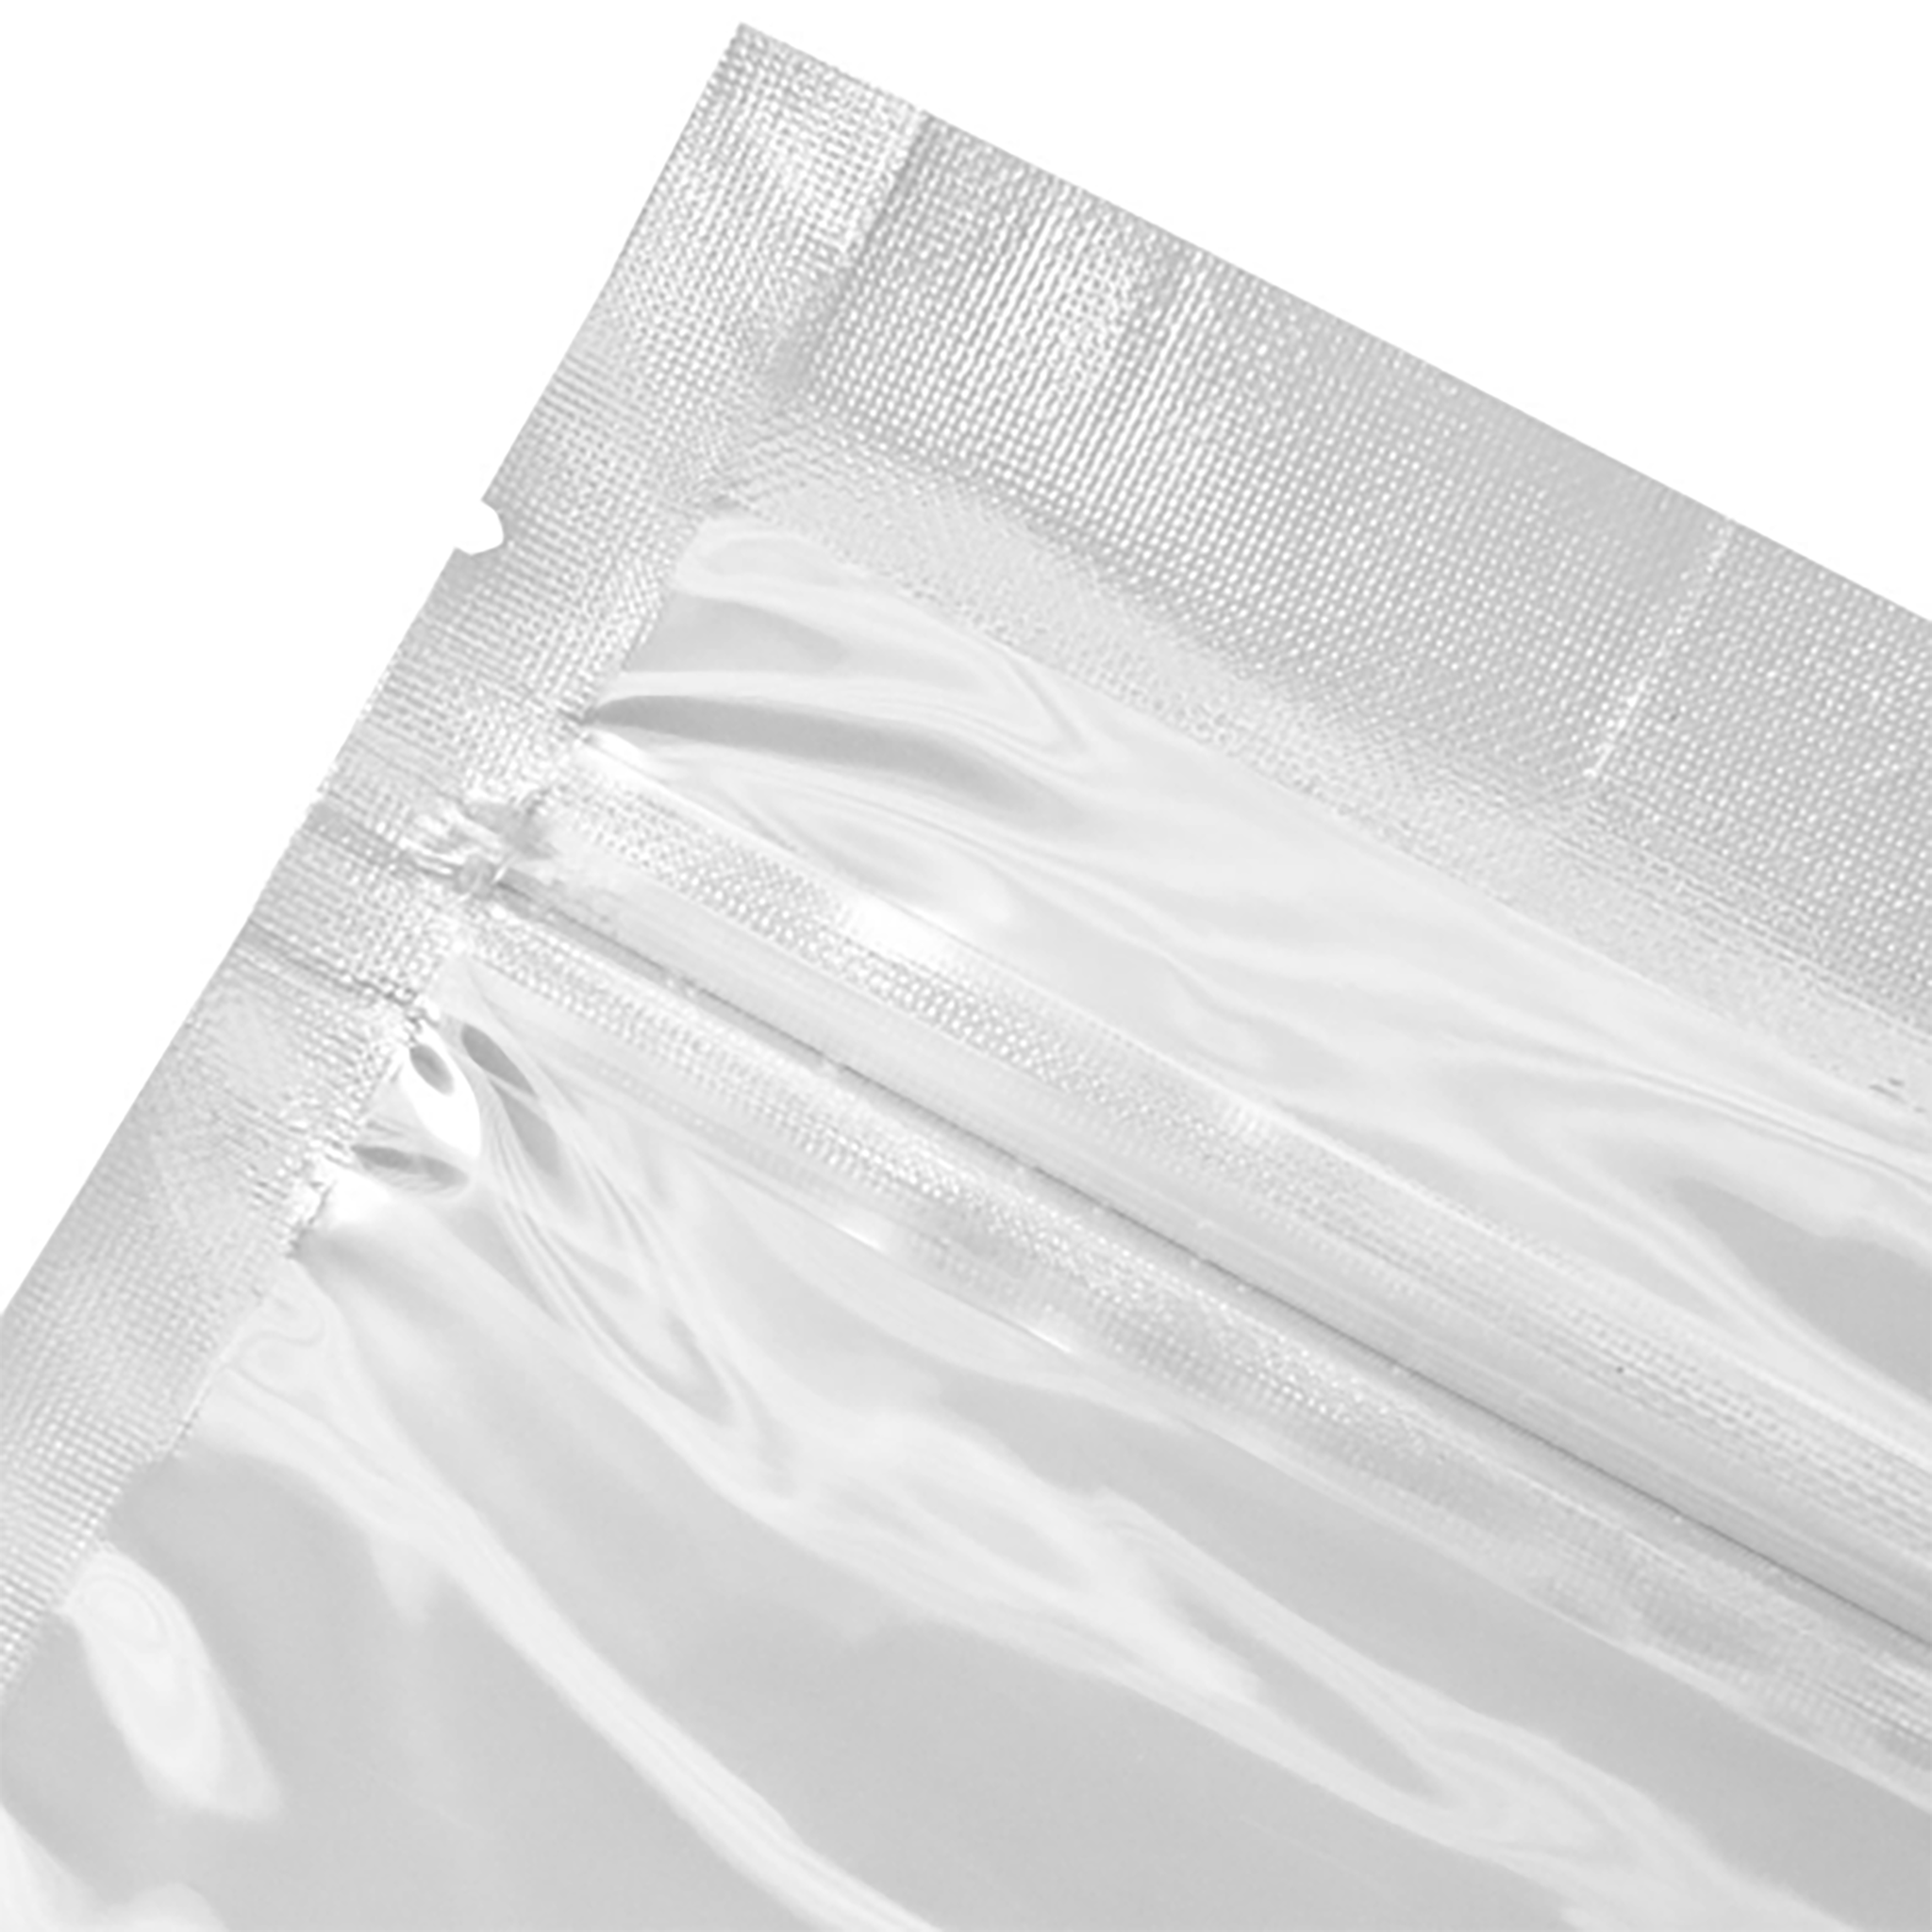 Vacuum Sealer Bags – 500 Units - 12x22 by Hal Packaging Consumables